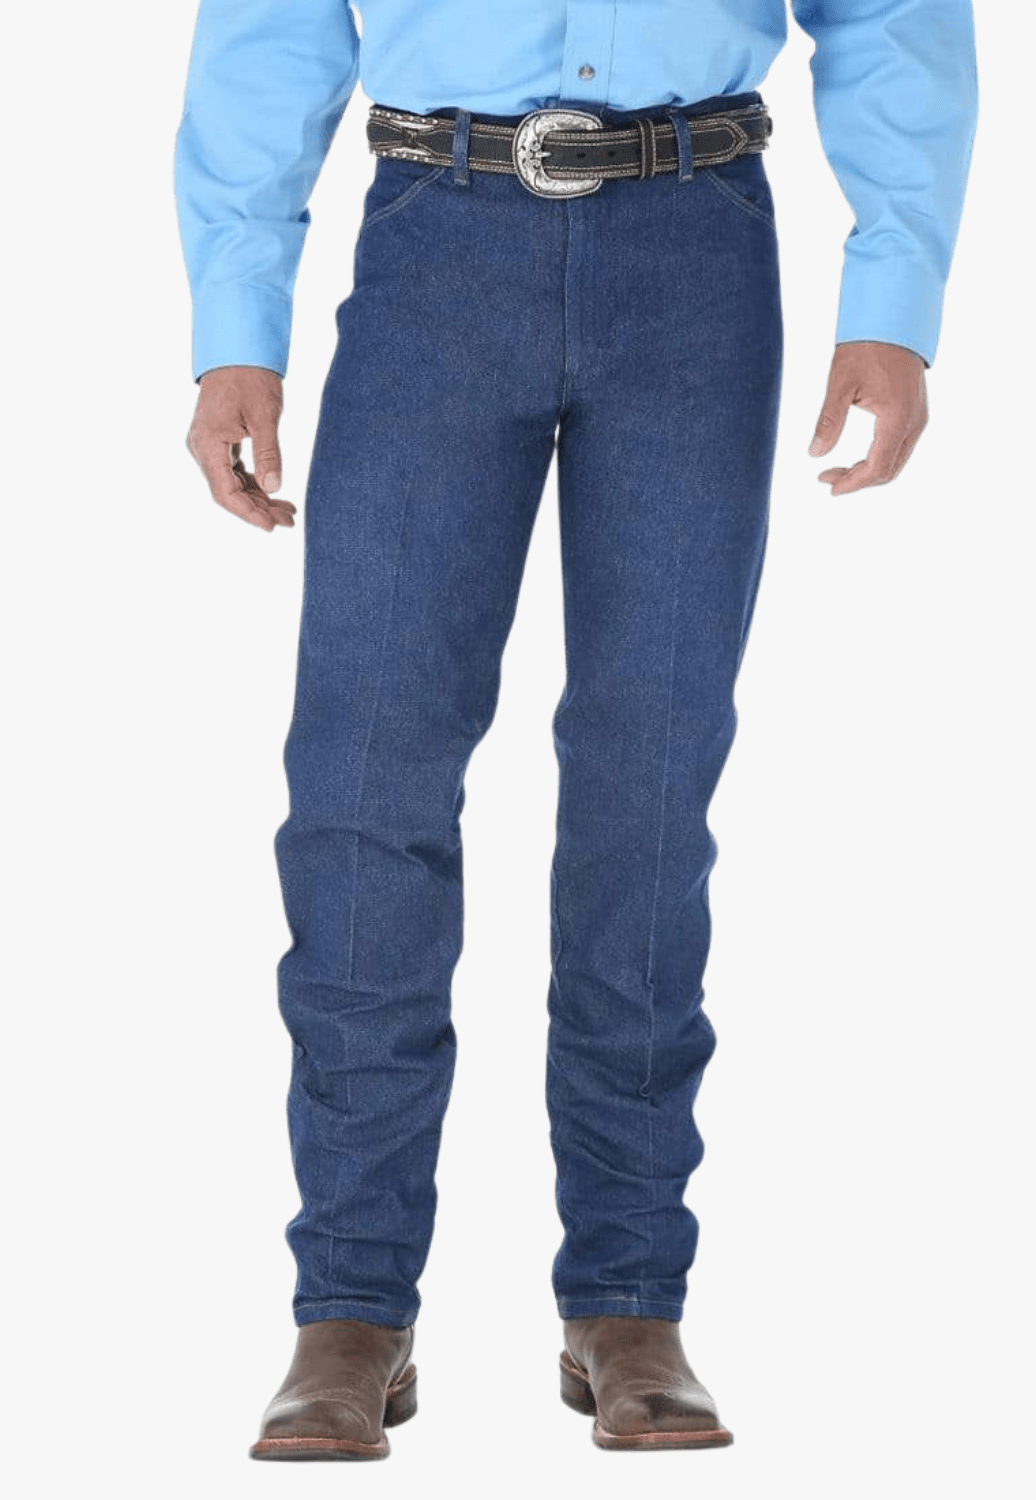 Ordinere At søge tilflugt tiger Men's Jeans | Men's Western & Country Jeans | W. Titley & Co Tagged " wrangler"